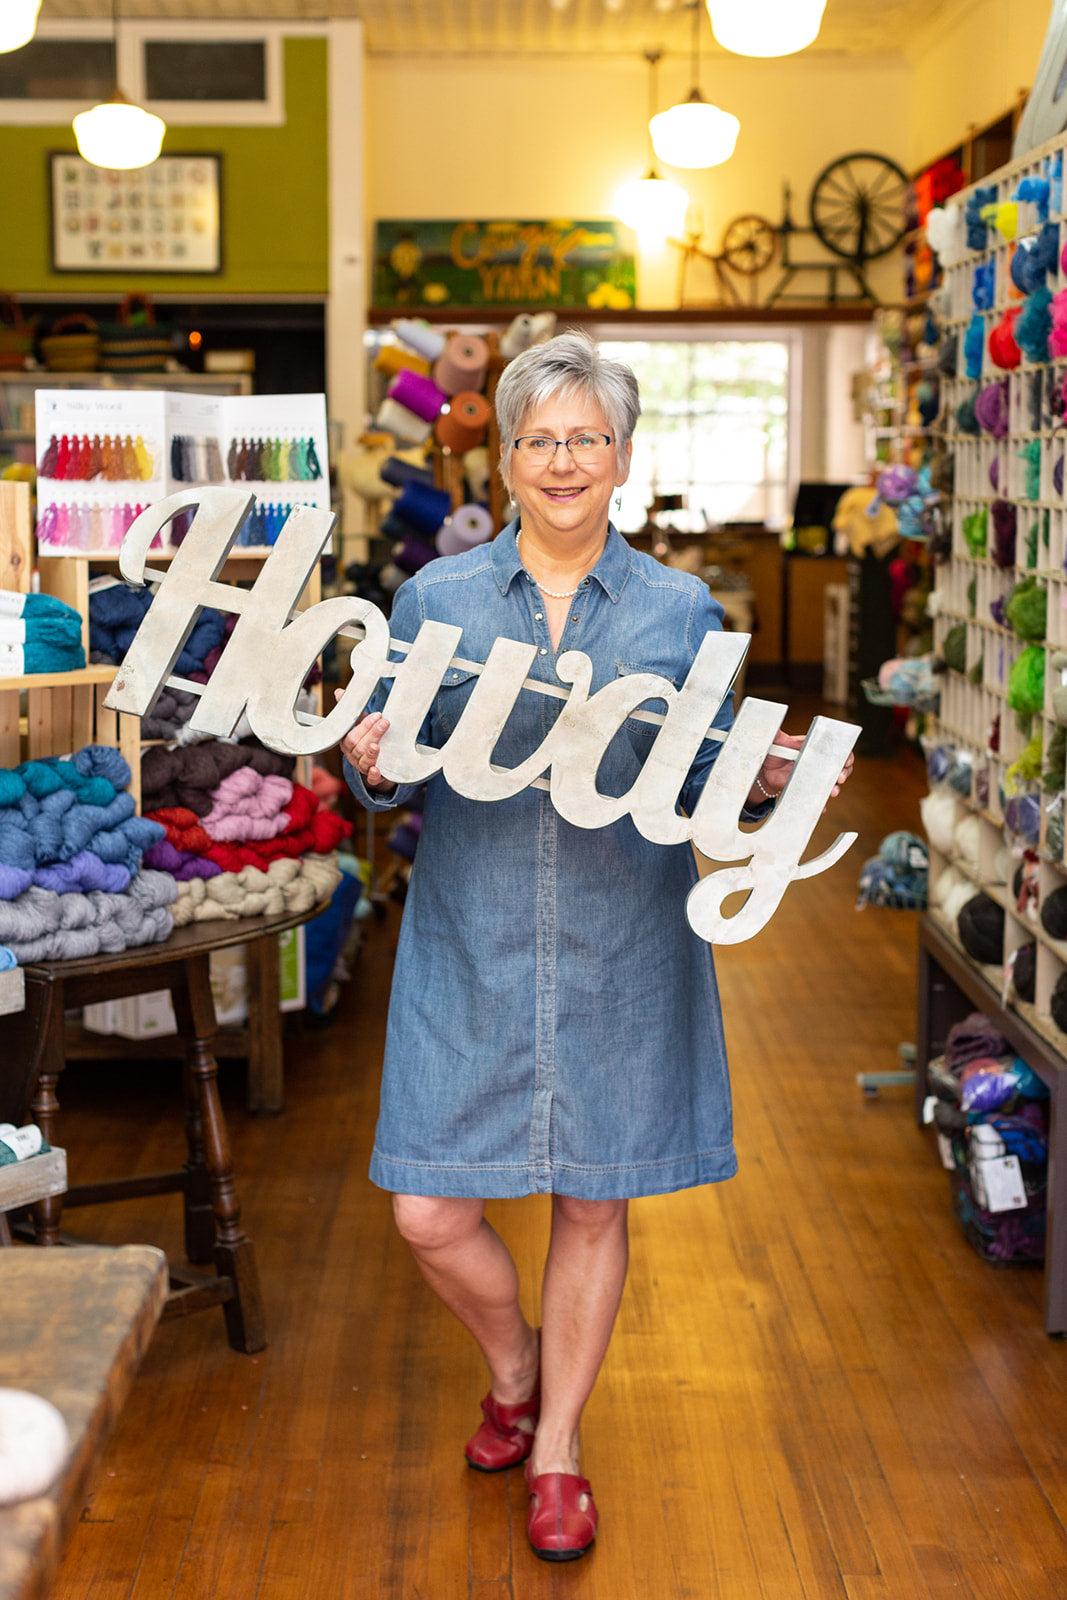 Image of a woman holding a sign that says, "Howdy" in a yarn store.